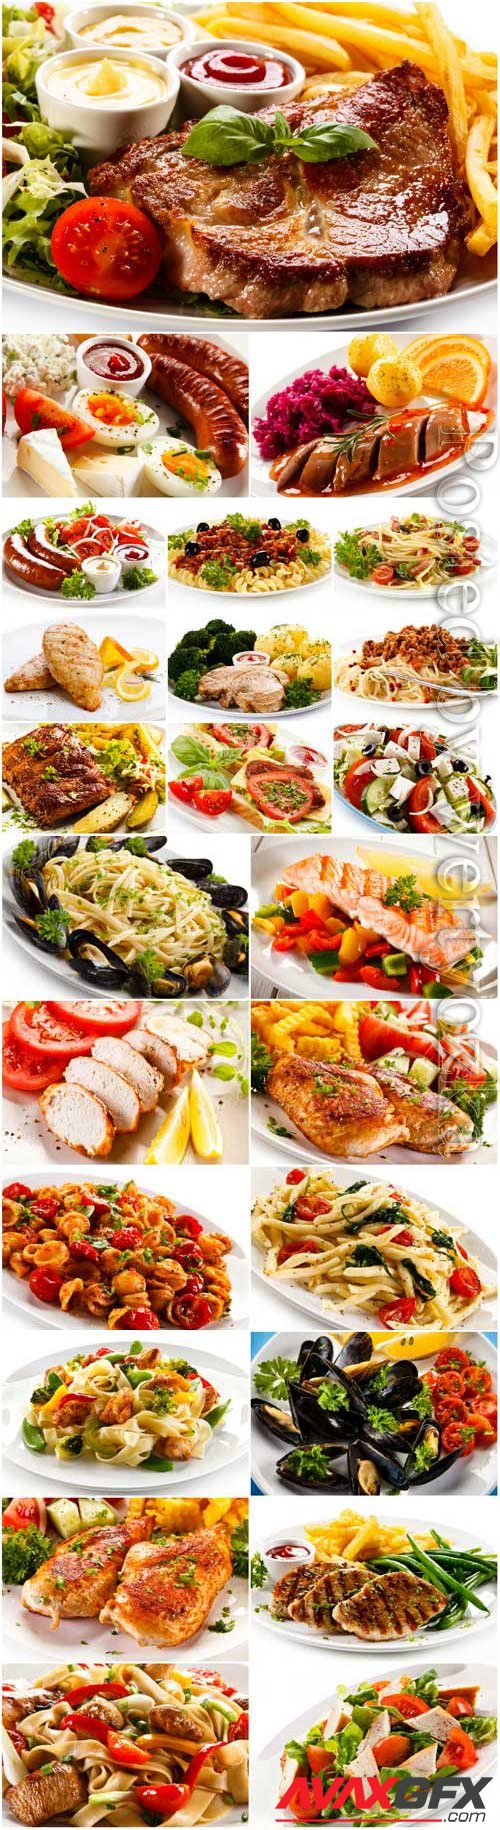 Delicious food, meat and vegetables stock photo